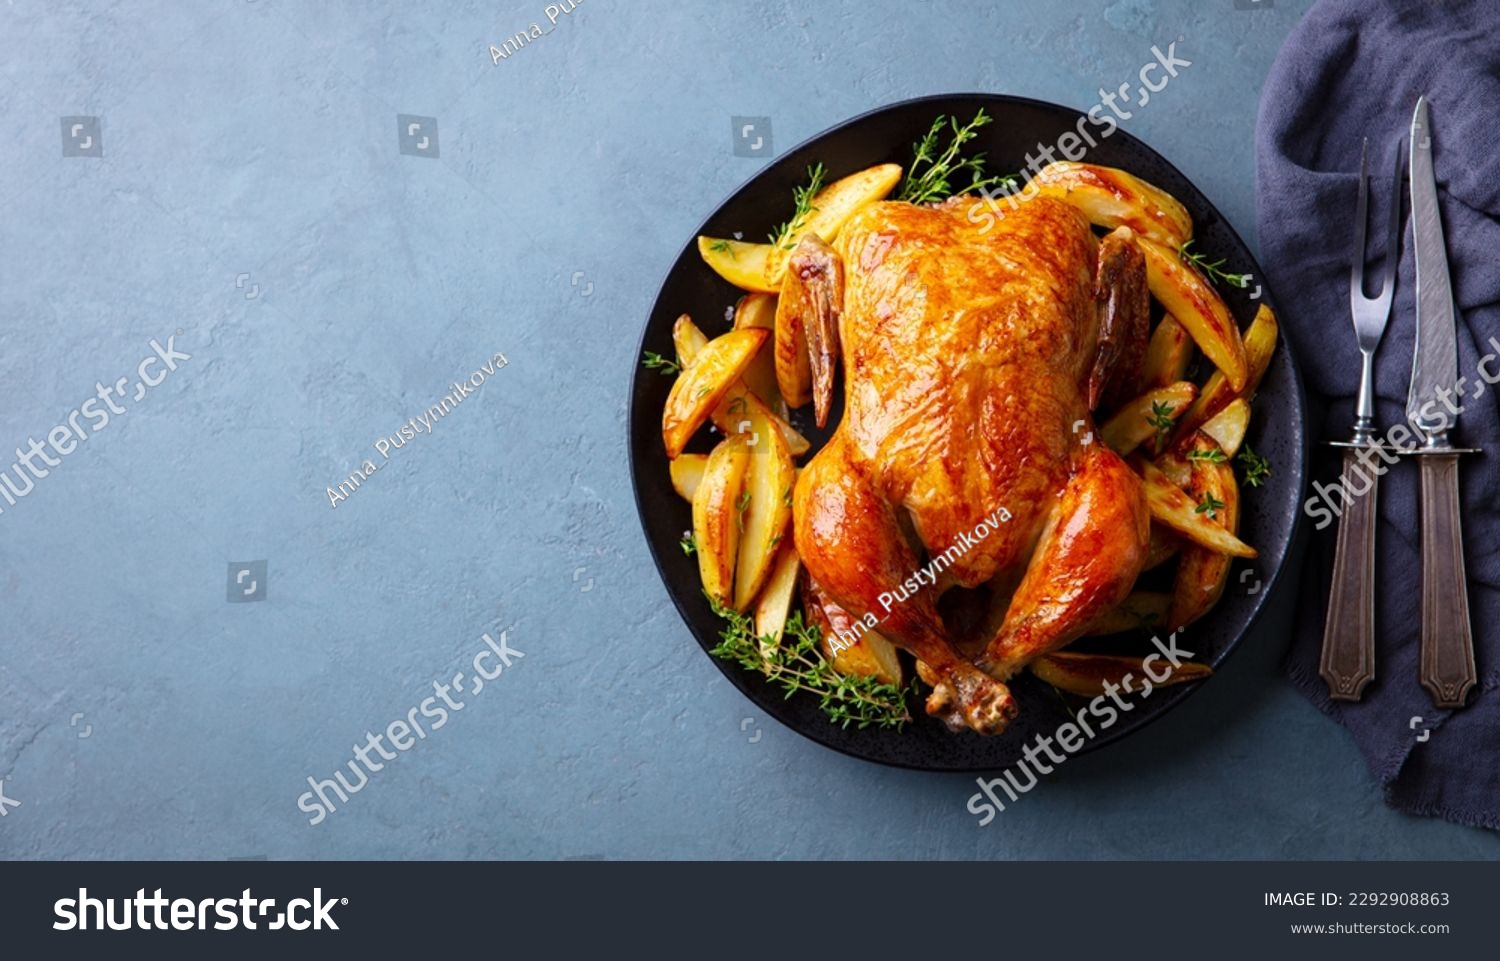 Roasted, baked chicken with potatoes and herbs on dark plate. Grey background. Copy space. Top view. #2292908863